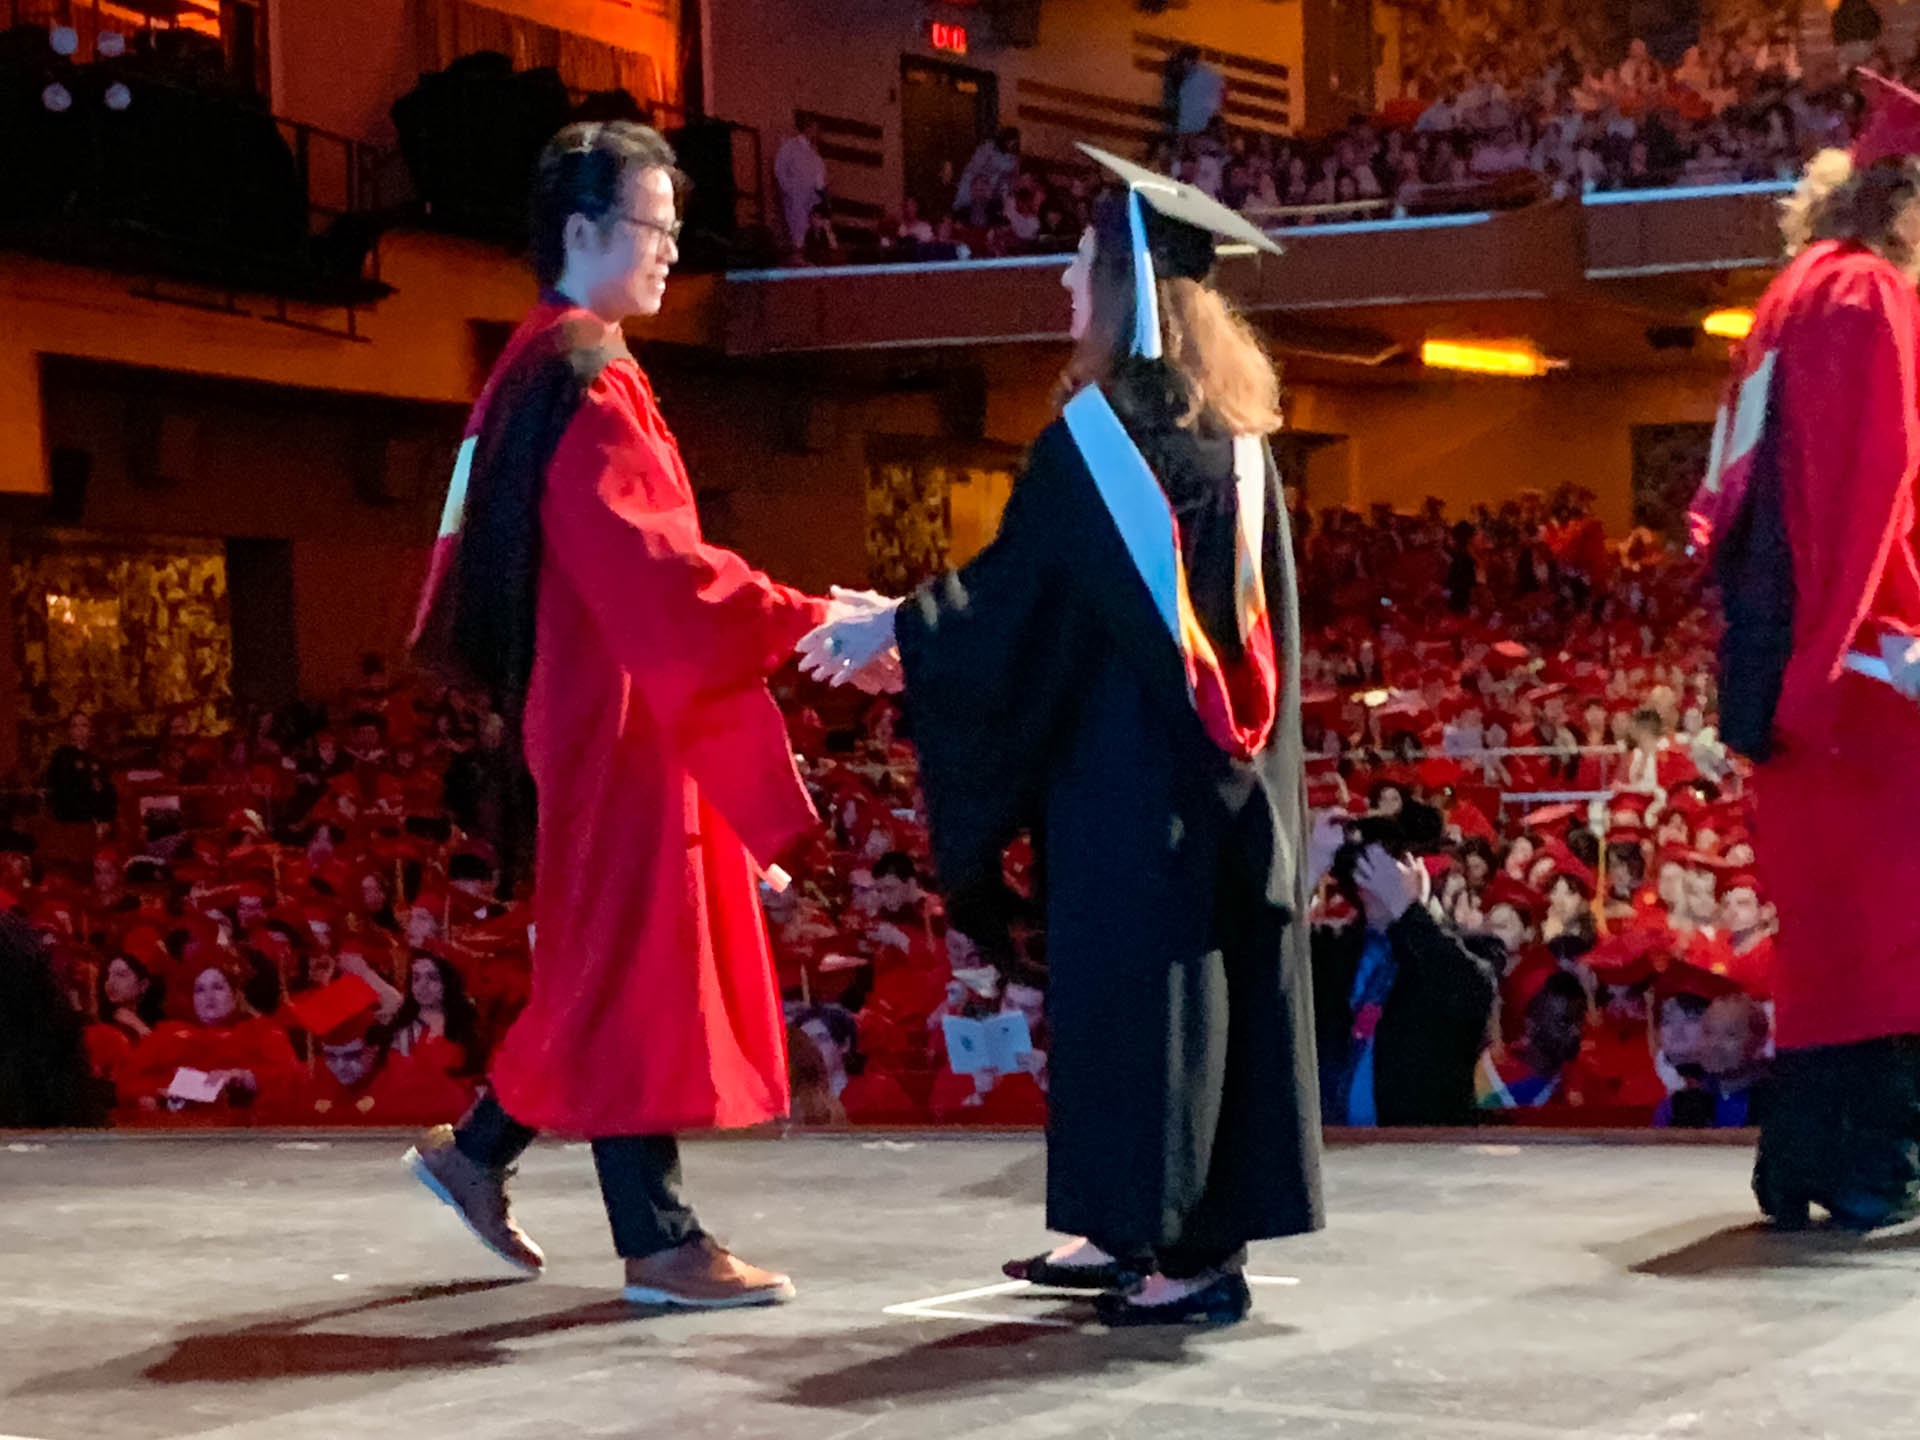 a student getting their diploma on stage